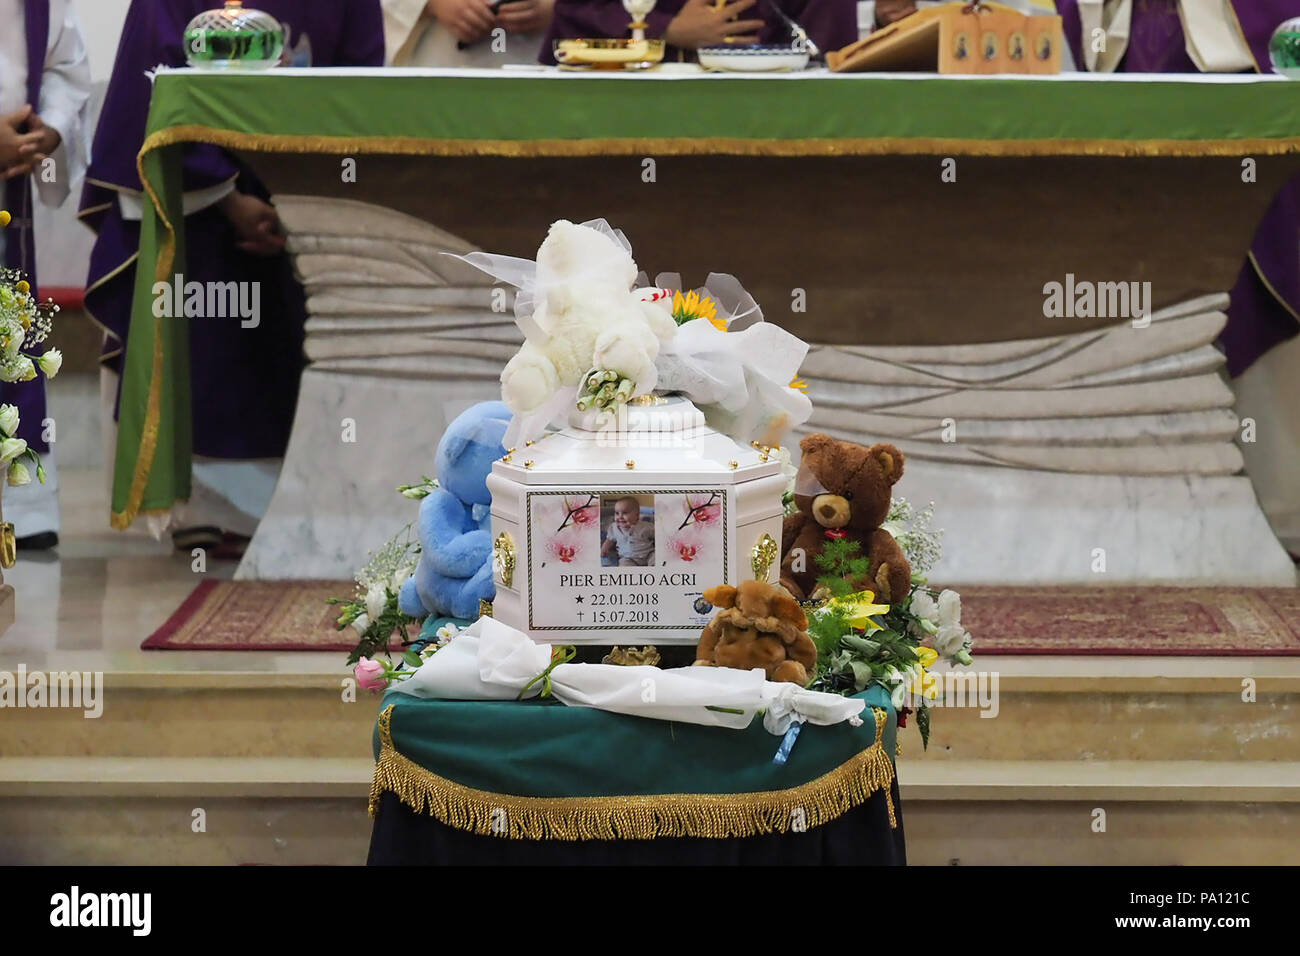 Rossano, Italy. 19th July, 2018. Rossano, the funeral of Stanislao Acri, a 35-year-old lawyer, his wife Daria Stella Olivo, aged 35, and their little 6-month-old Pier Antonio Acri, who died on 15 July in a terrible accident on the A1 near Frosinone. They were coming back from Rome on board their Fiat Punto and were hit by a van. Stanislao Acri had been nominated for mayor of Rossano for the Movimento 5 Stelle.19/07/2018, Rossano, Italy Credit: Independent Photo Agency Srl/Alamy Live News Stock Photo